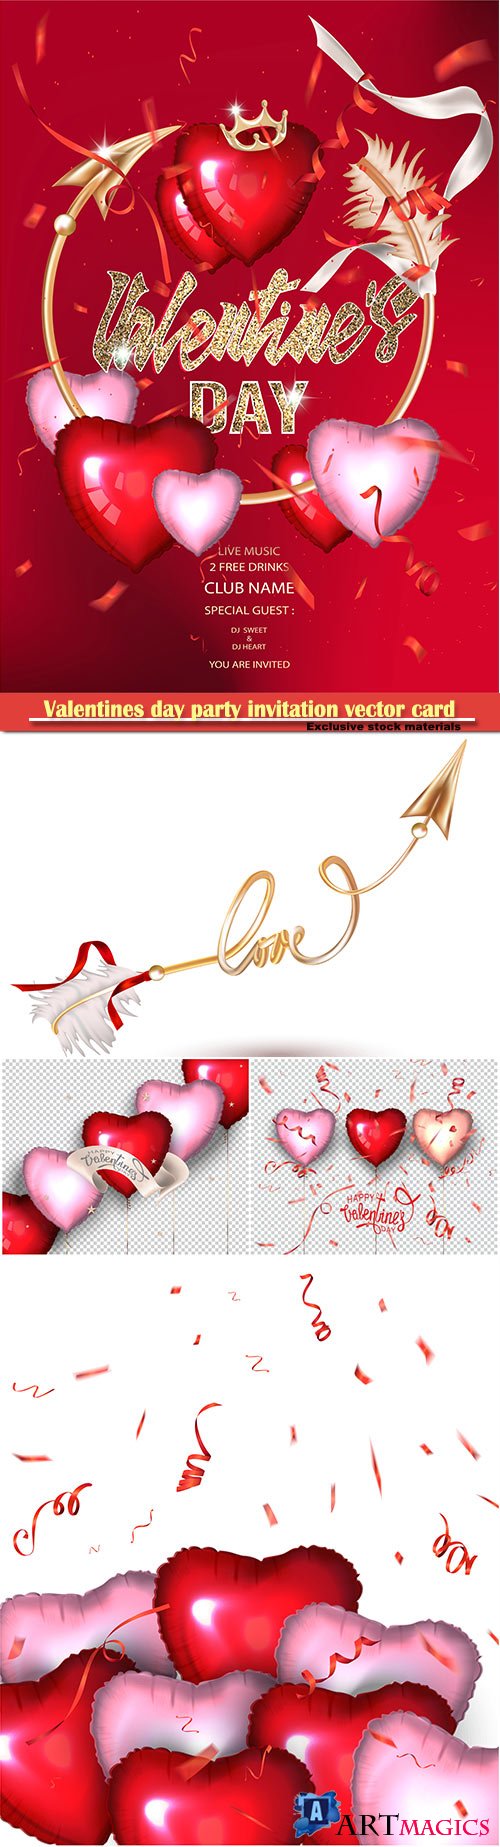 Valentines day party invitation vector card # 4